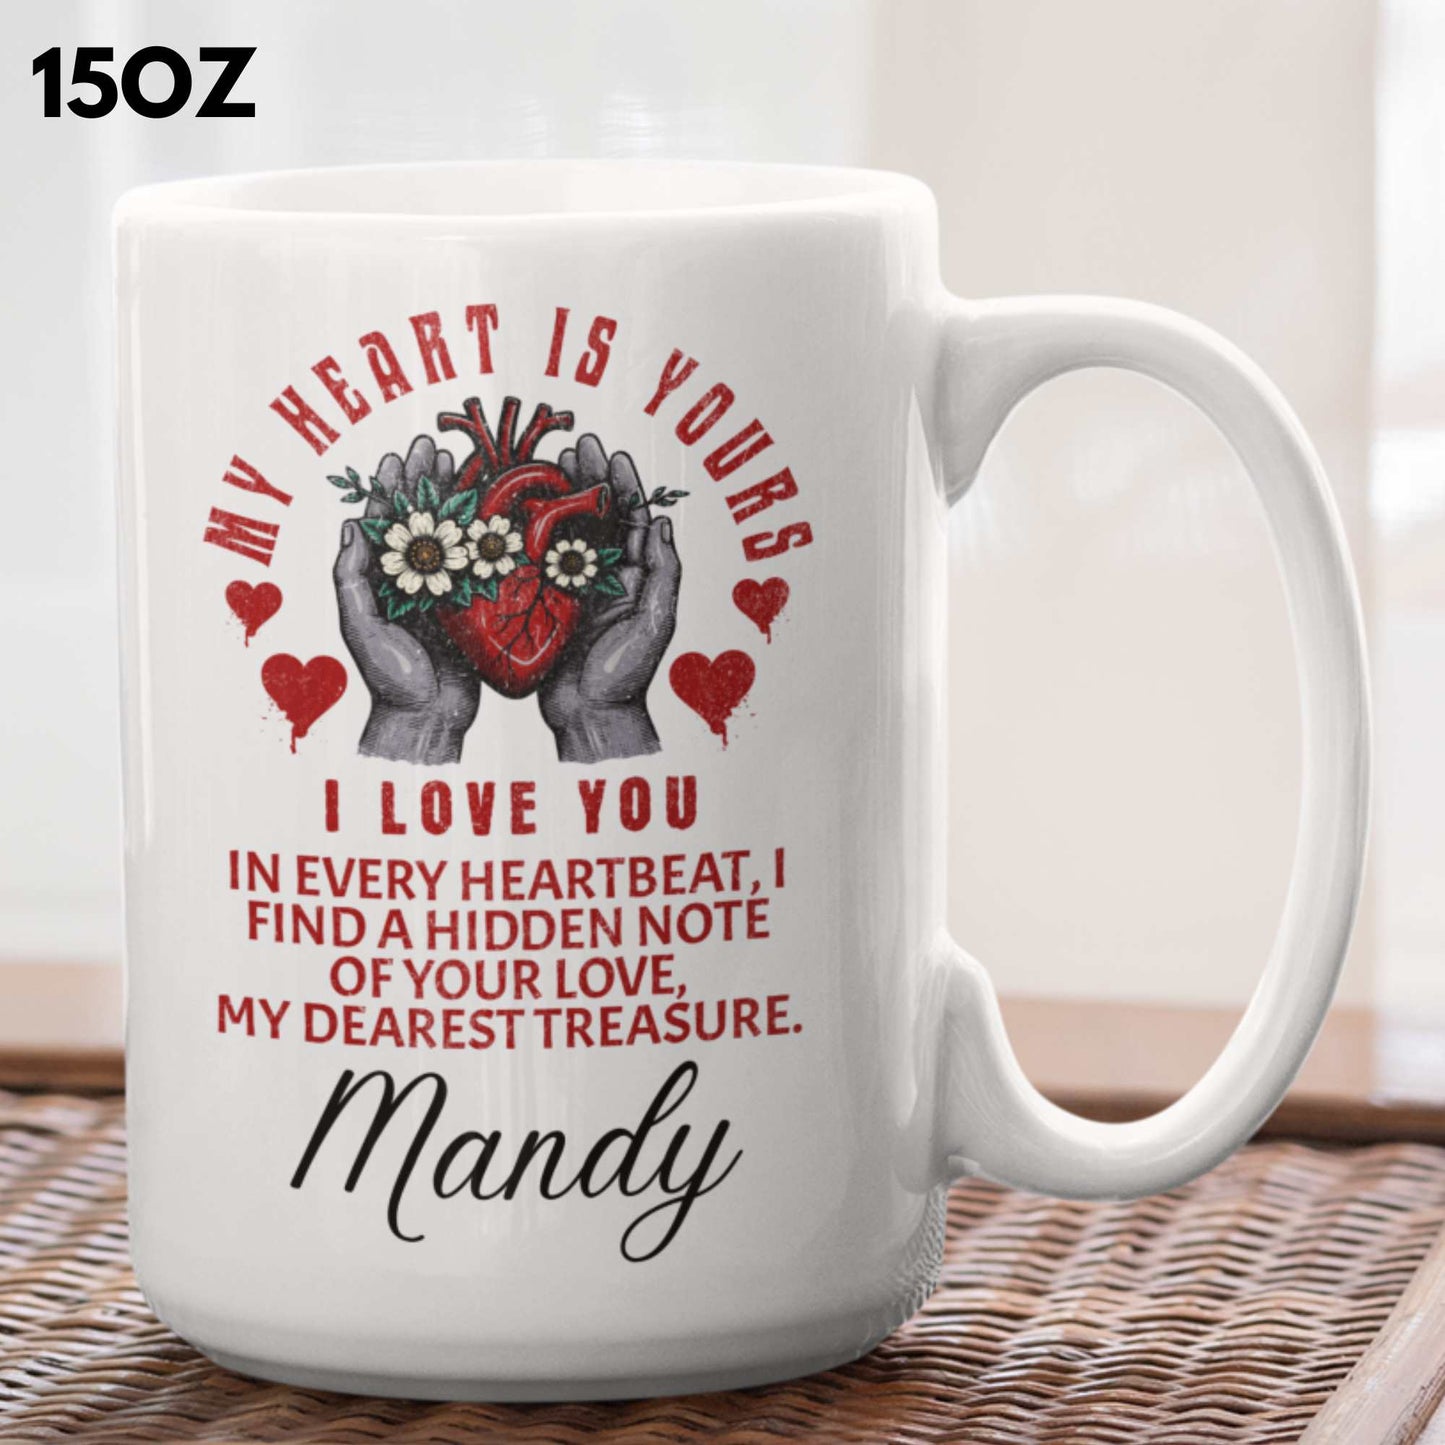 "My Heart is Yours - I Love You" Personalised Gift, Romantic Mug, Customisable Cup with Name, Love Note Mug